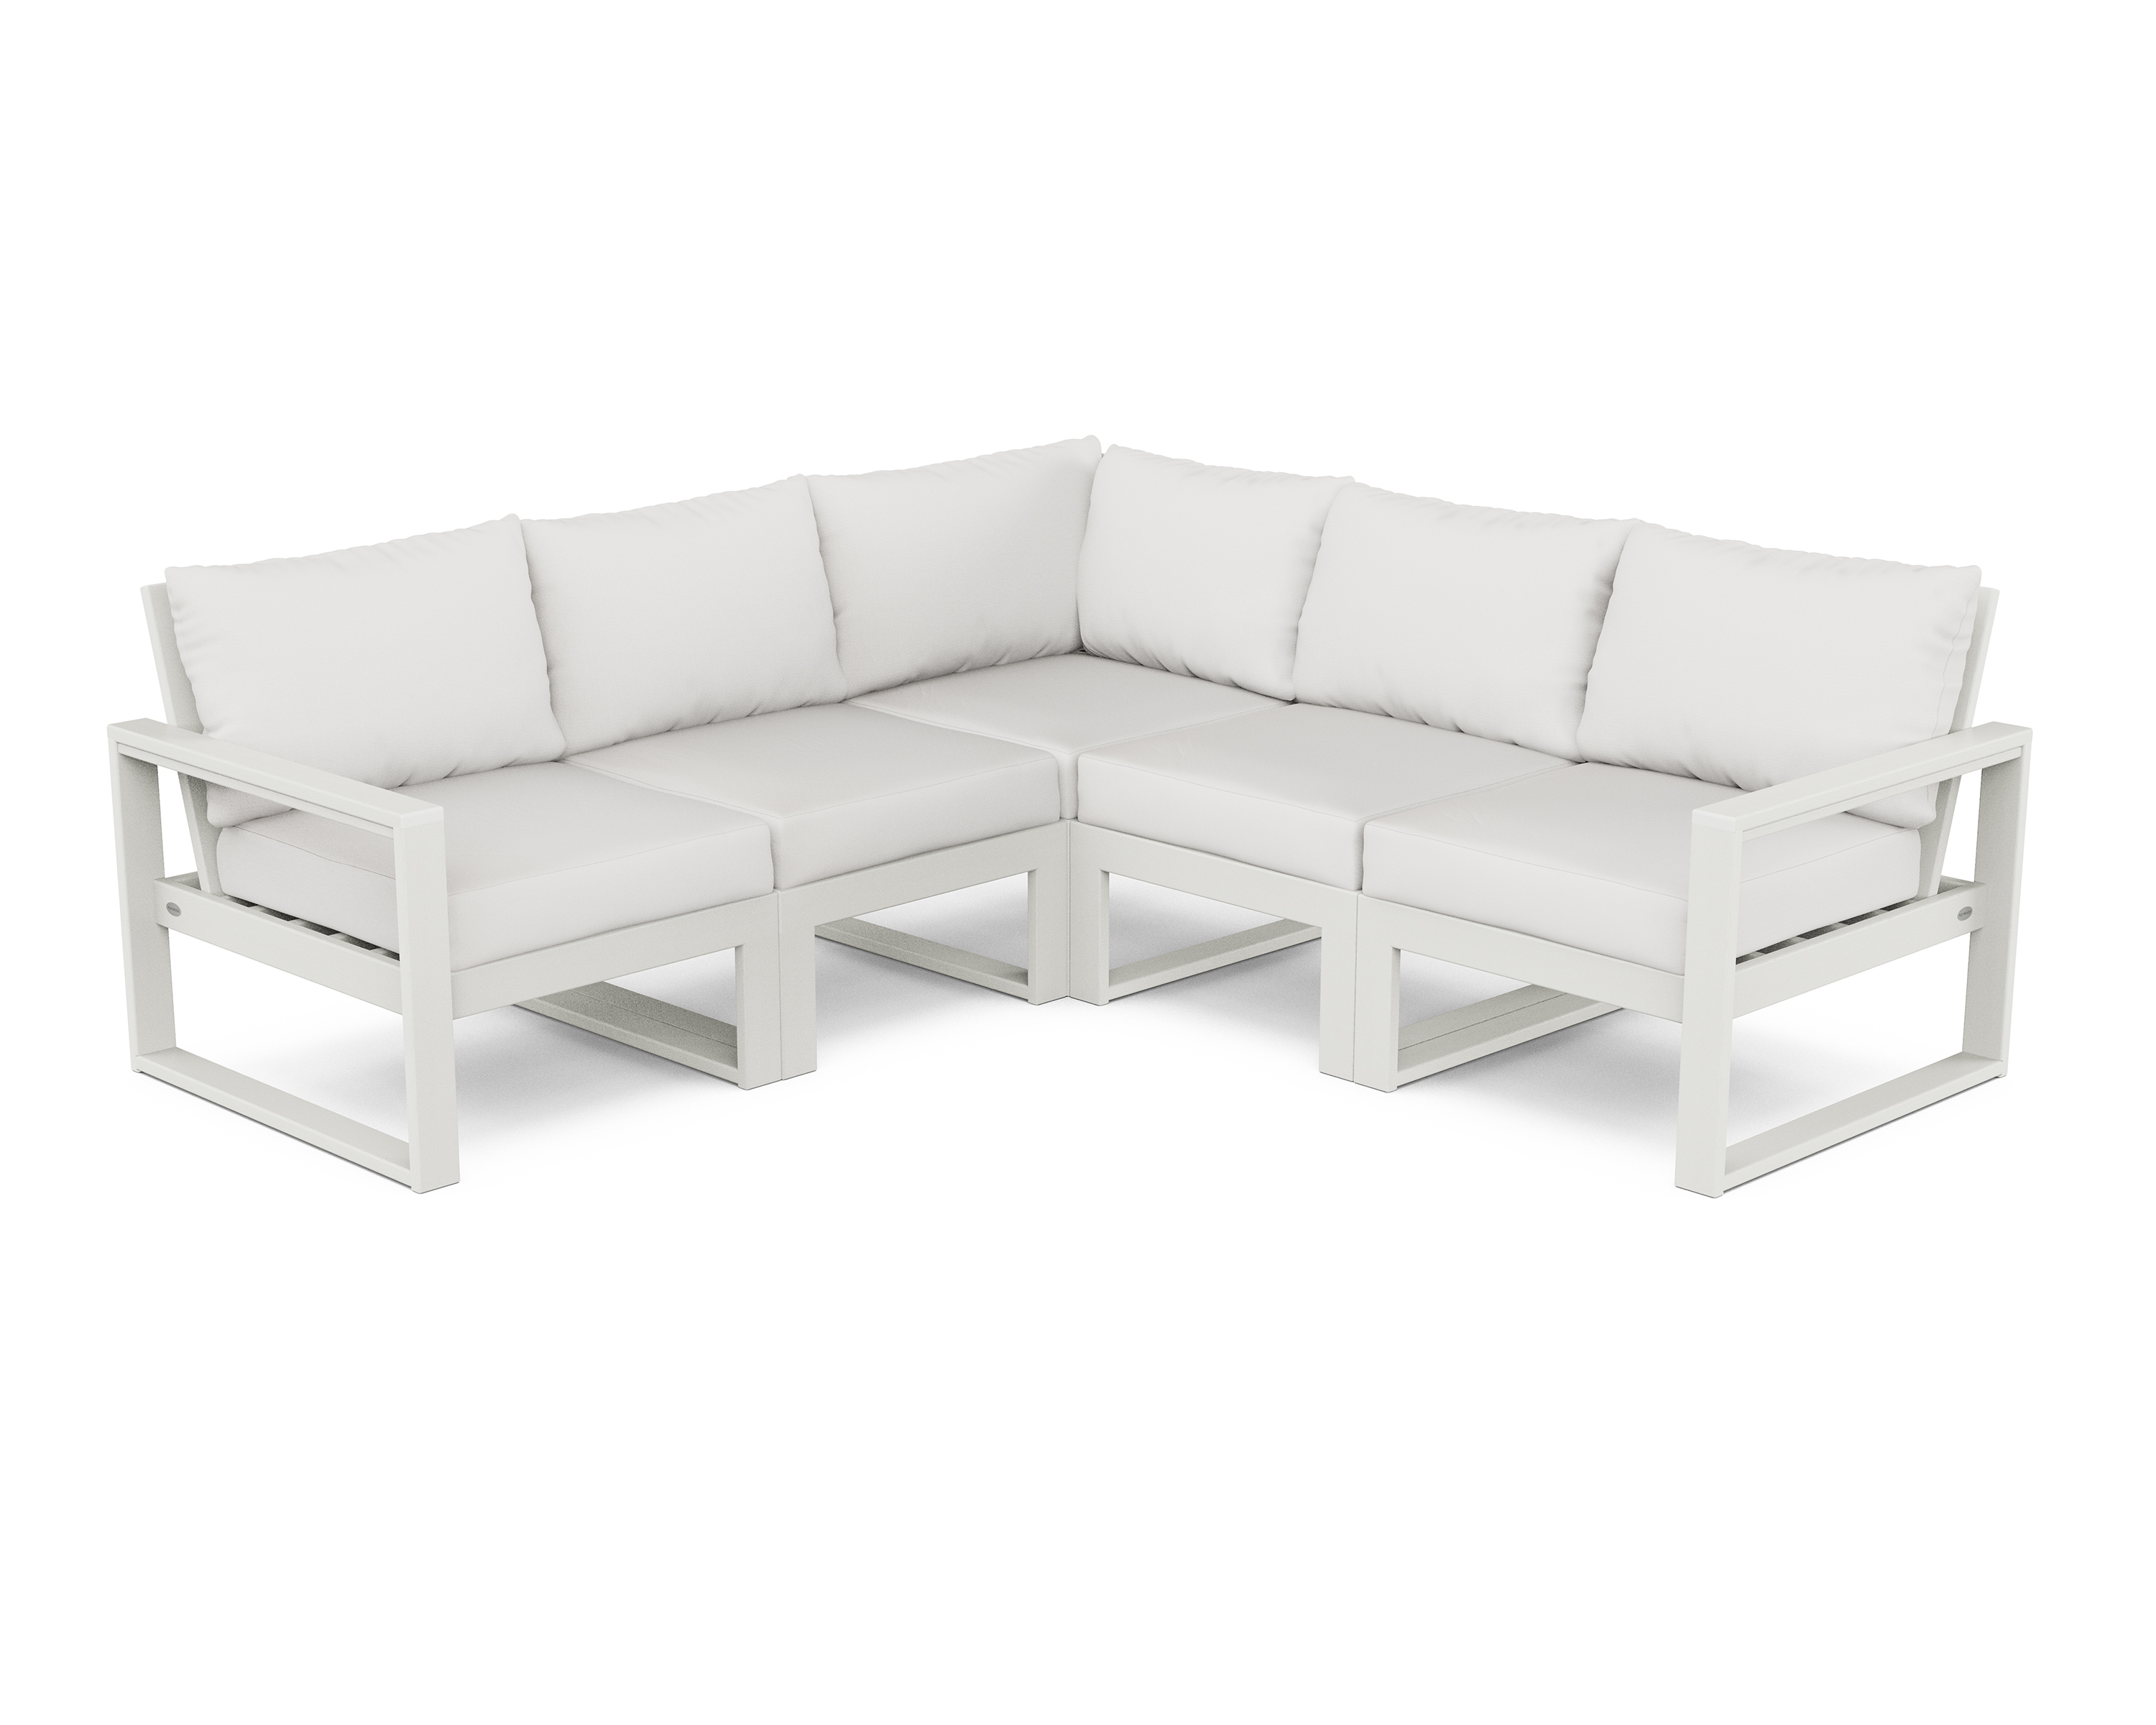 edge 5-piece modular deep seating set in vintage white / textured linen product image